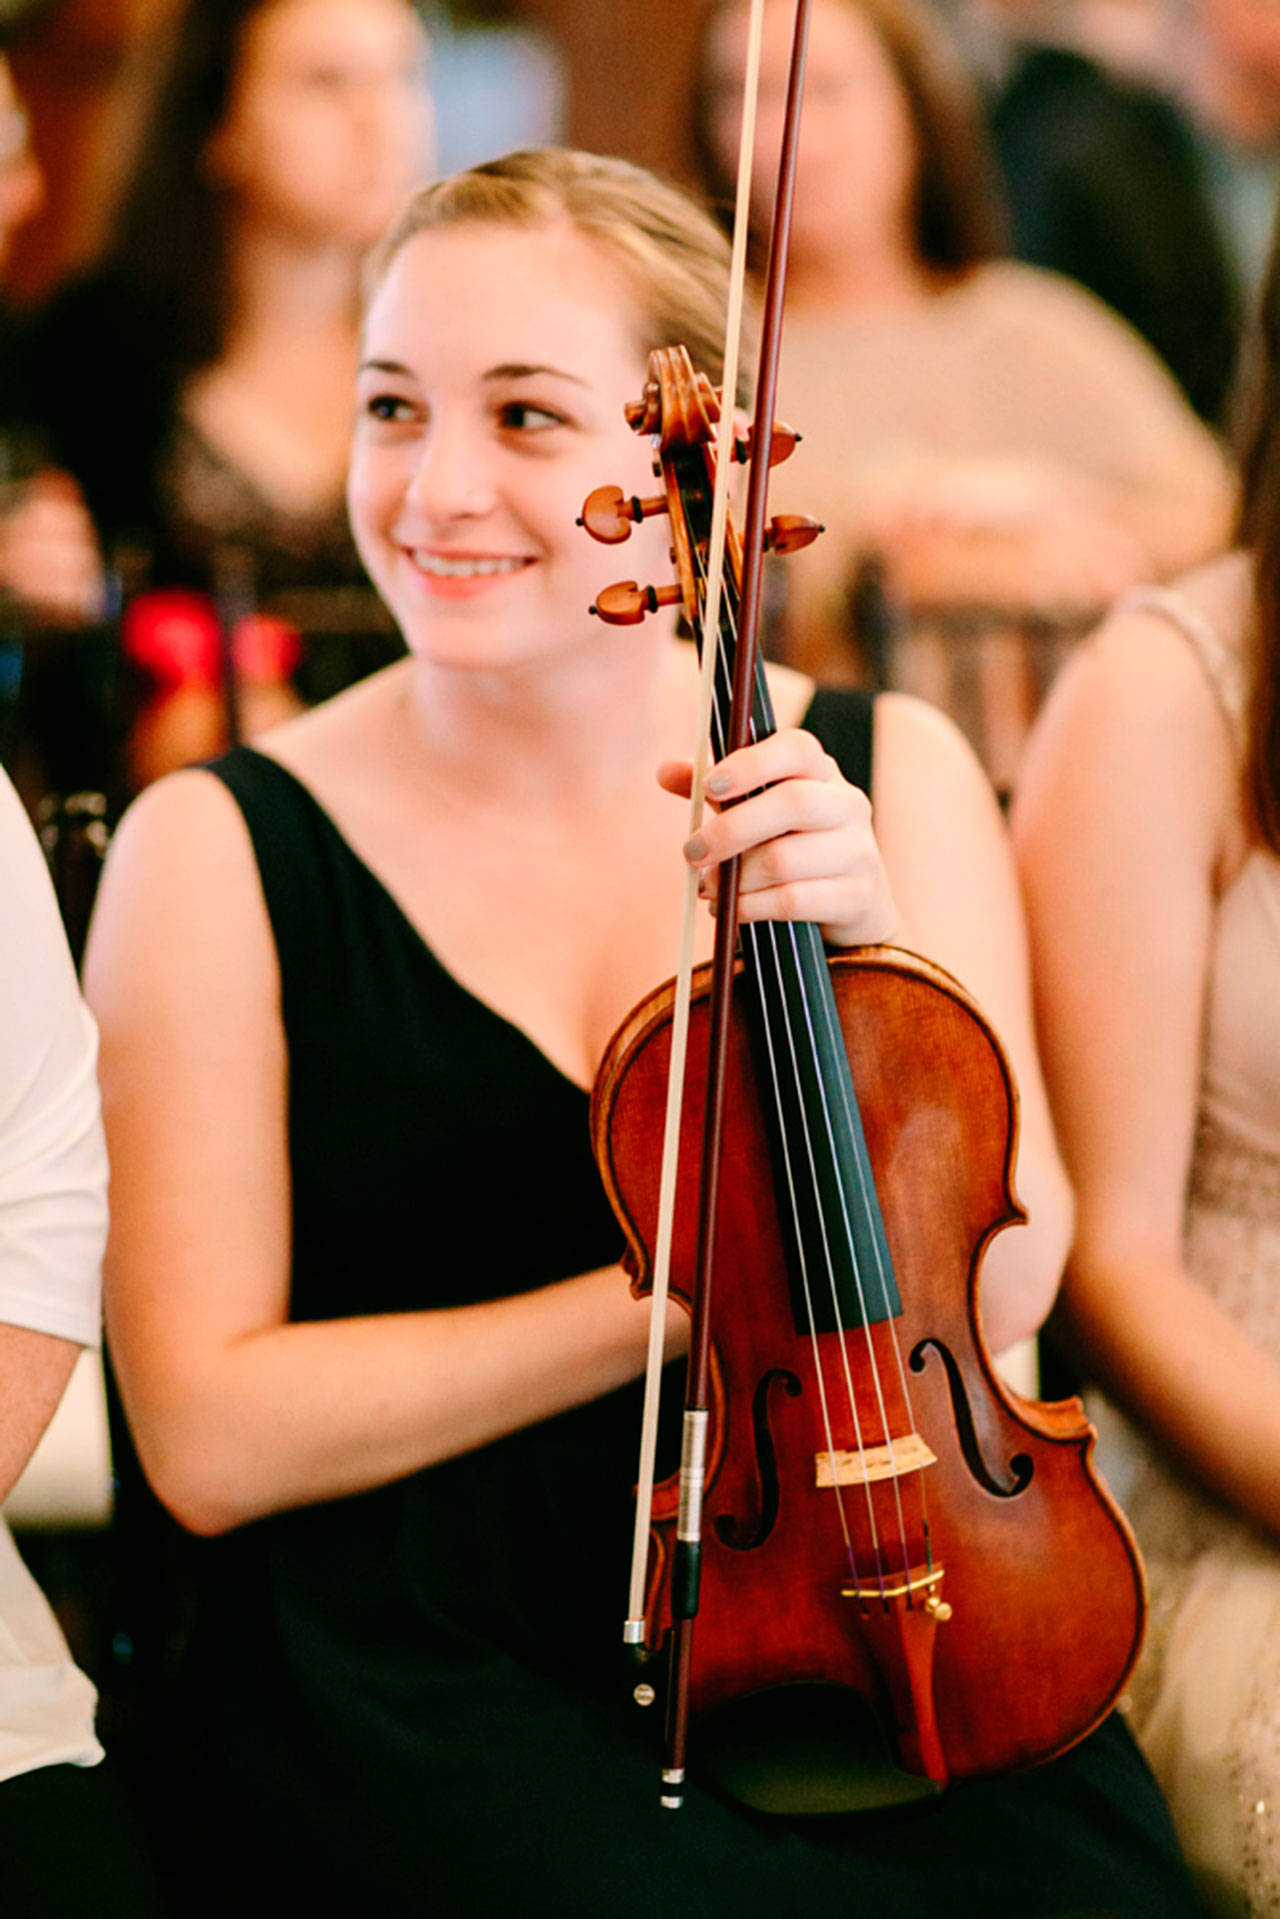 Photo courtesy of Sally Jo Martine | Guest violinist Emily Acri will perform with the Bainbridge Symphony Orchestra as part of their season finale Saturday, June 8 and Sunday, June 9.